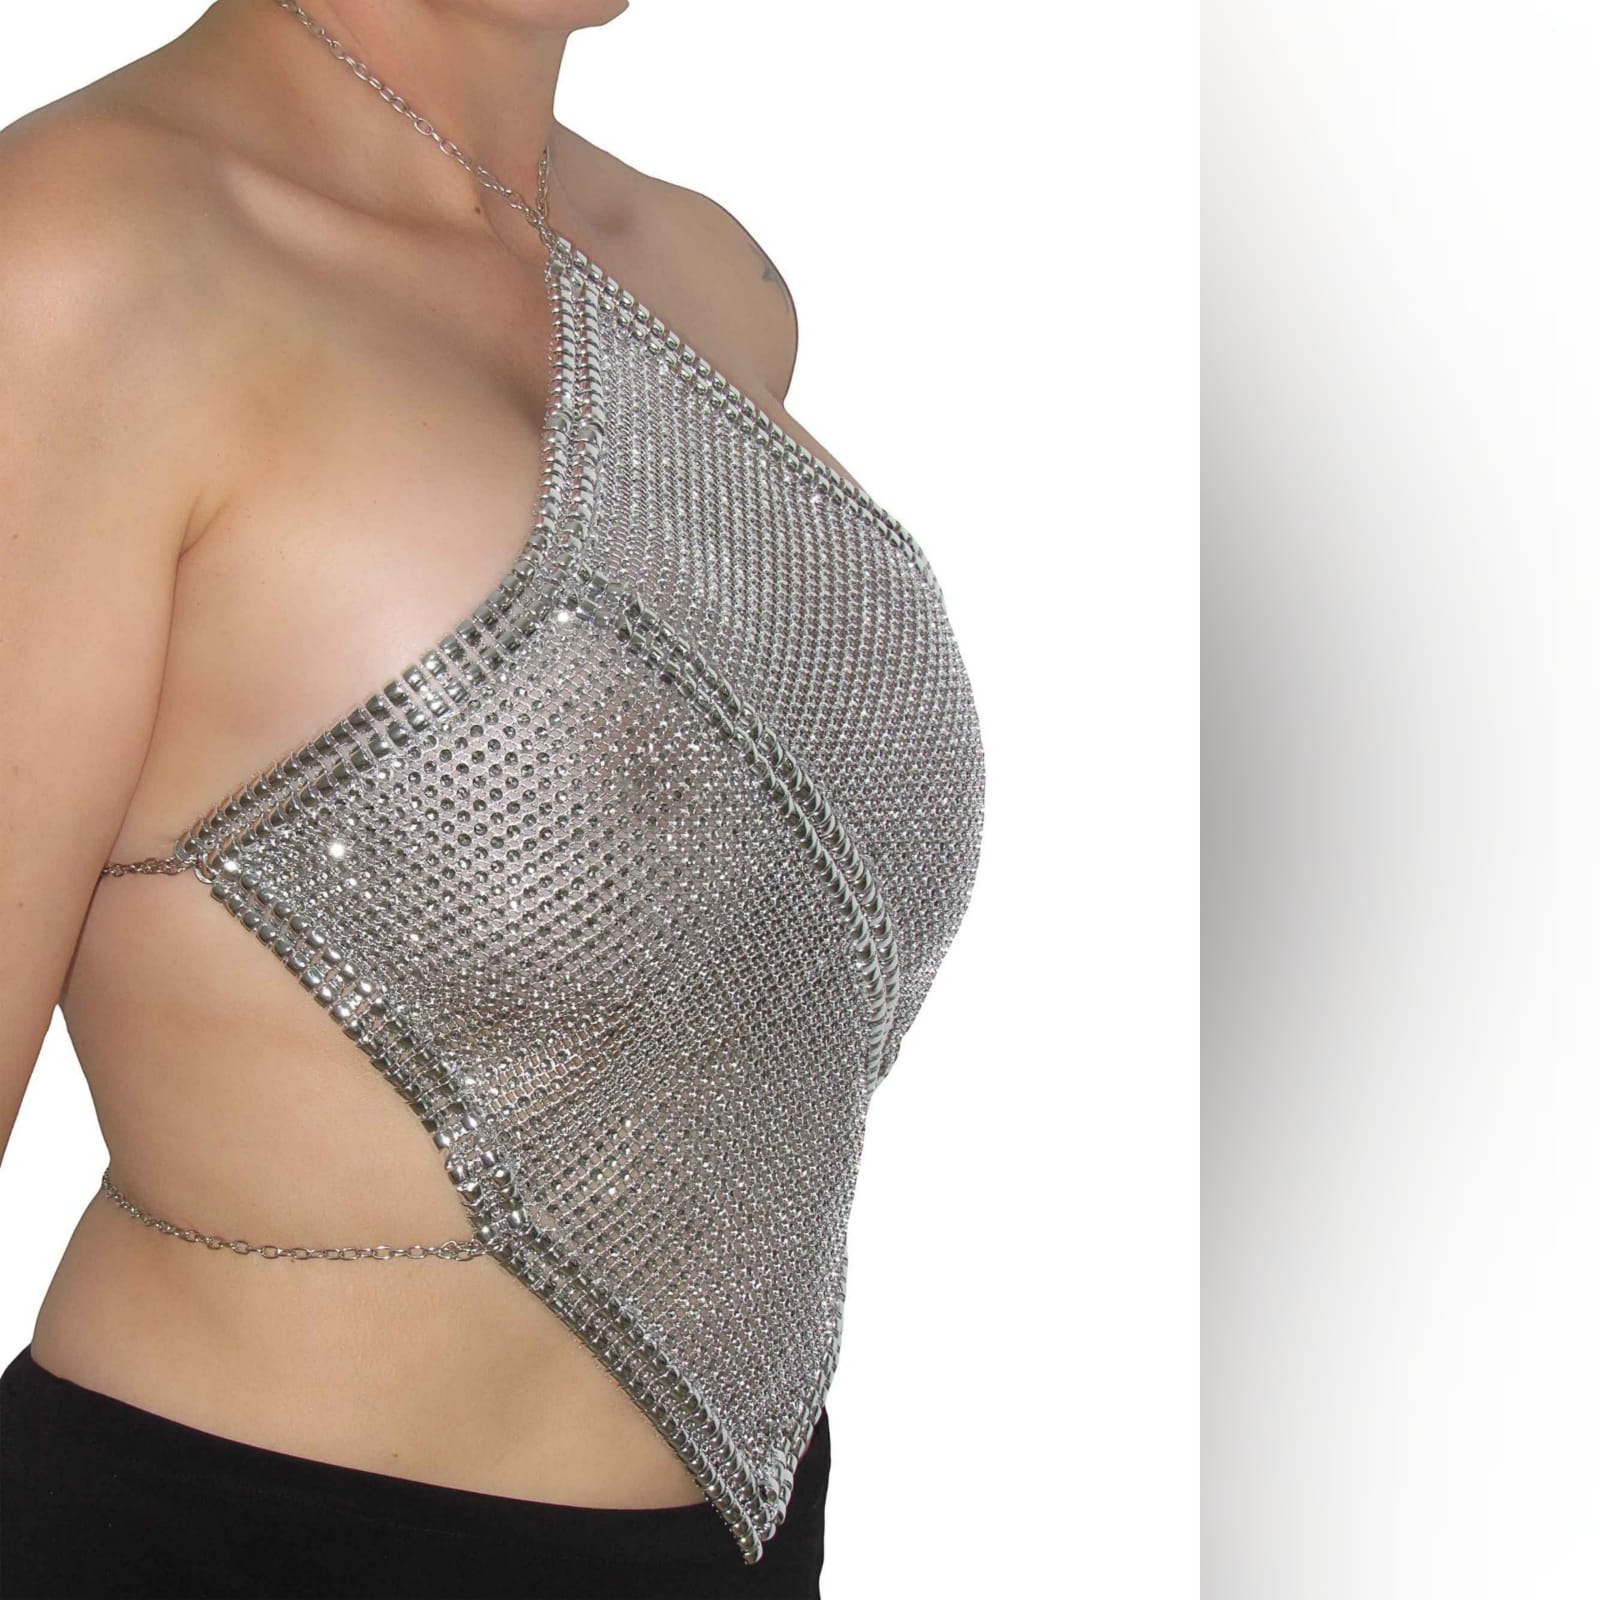 Diamond shape shiny silver crop top 1 diamond shape shiny silver crop top. Sexy top is great for dancing or a fun night out. Ties up on the neck and back with chain, which can be used to adjust the fit a sheer shiny top is great to add glamour and sexy to your look.